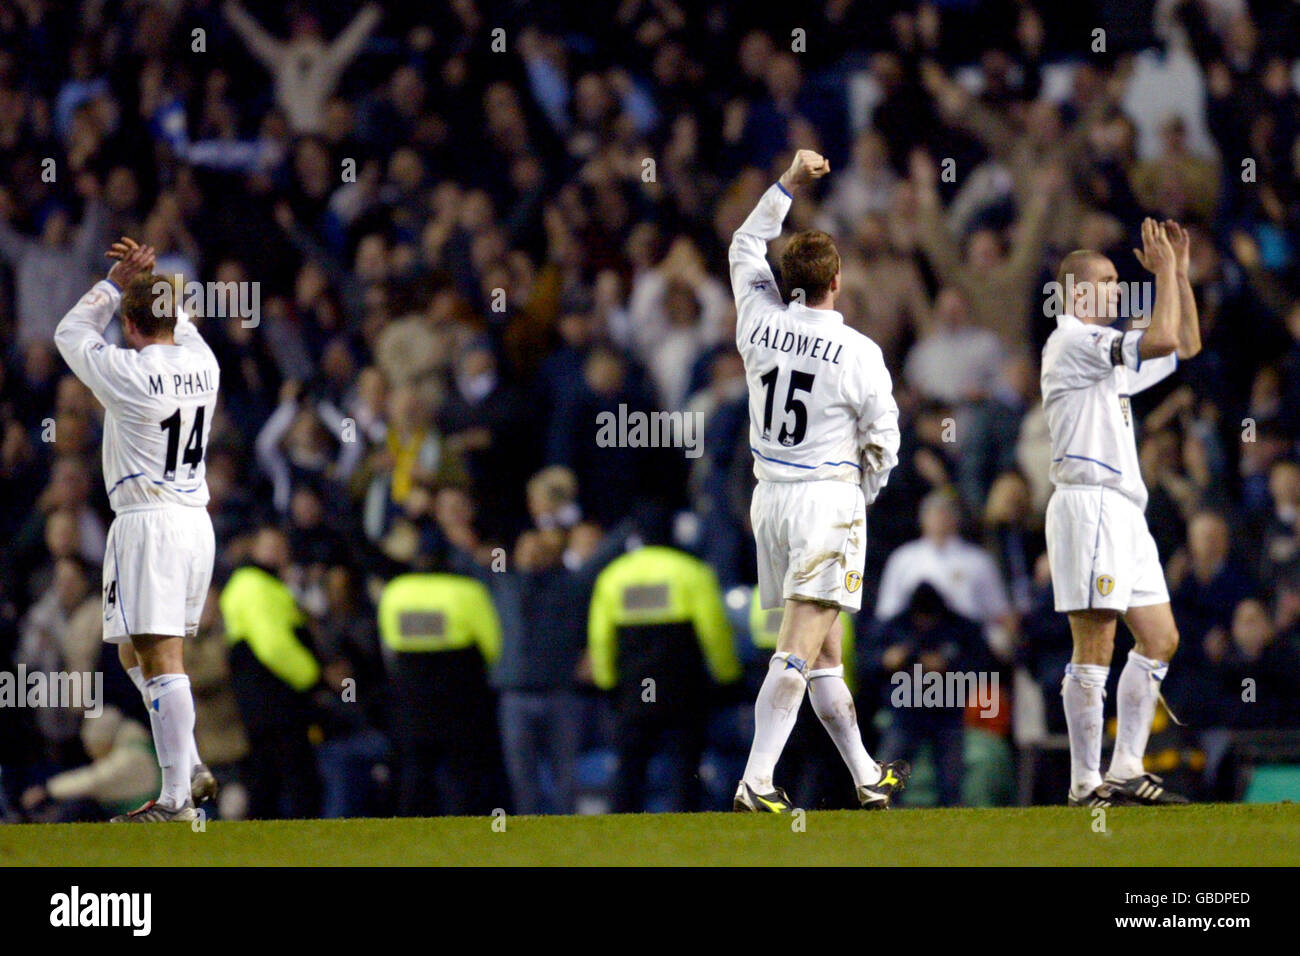 Leeds Uniteds Stephen McPhail (l), Stephen Caldwell (c) and Dominic Matteo (r) celebrate victory over Manchester City after the match Stock Photo